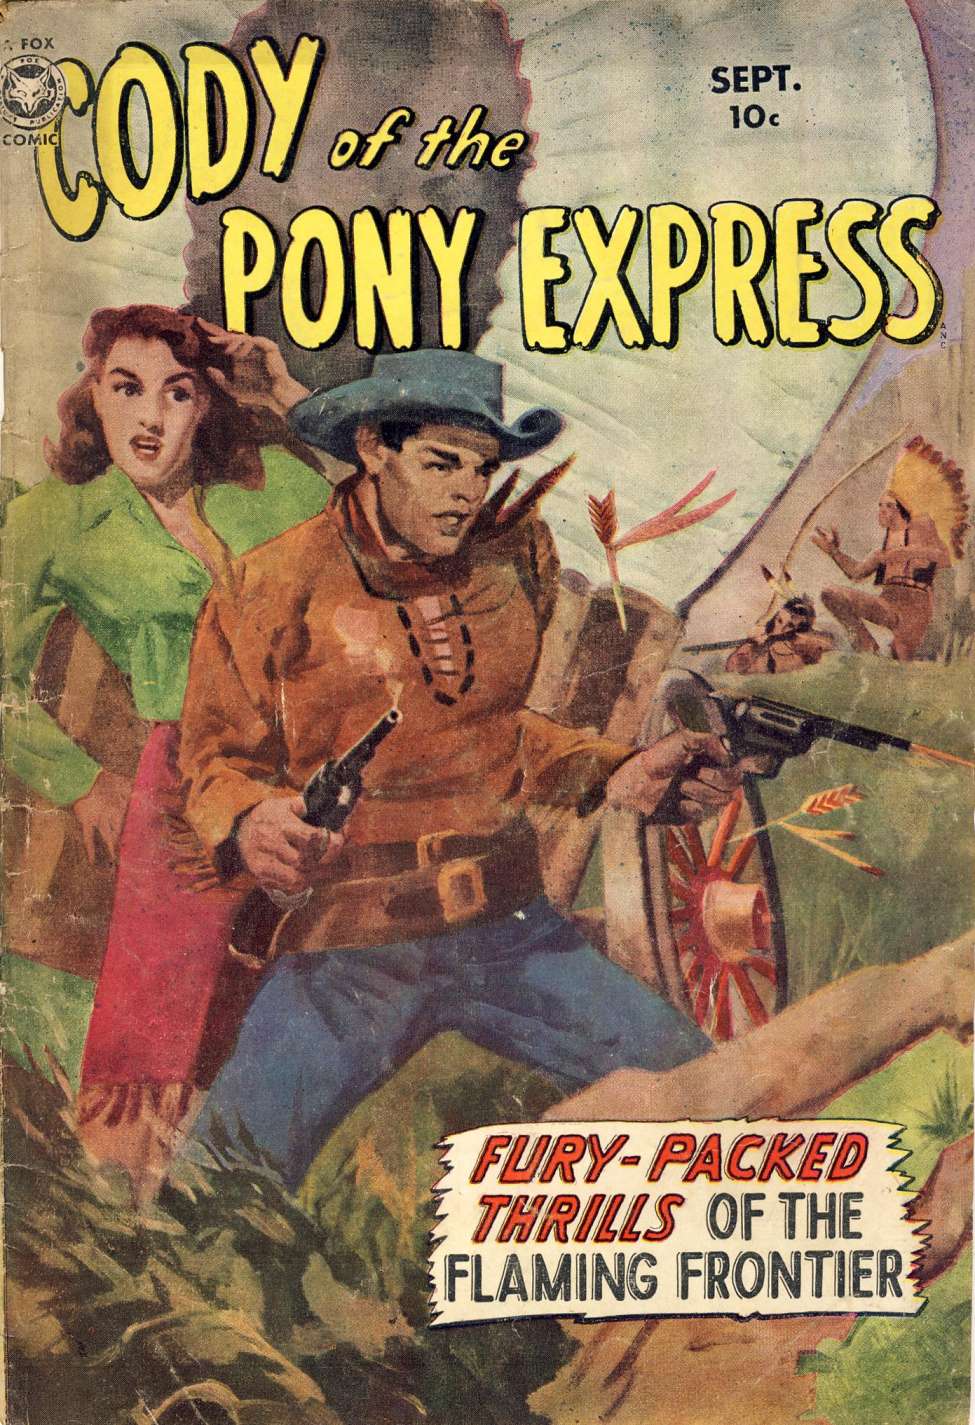 Book Cover For Cody of the Pony Express 1